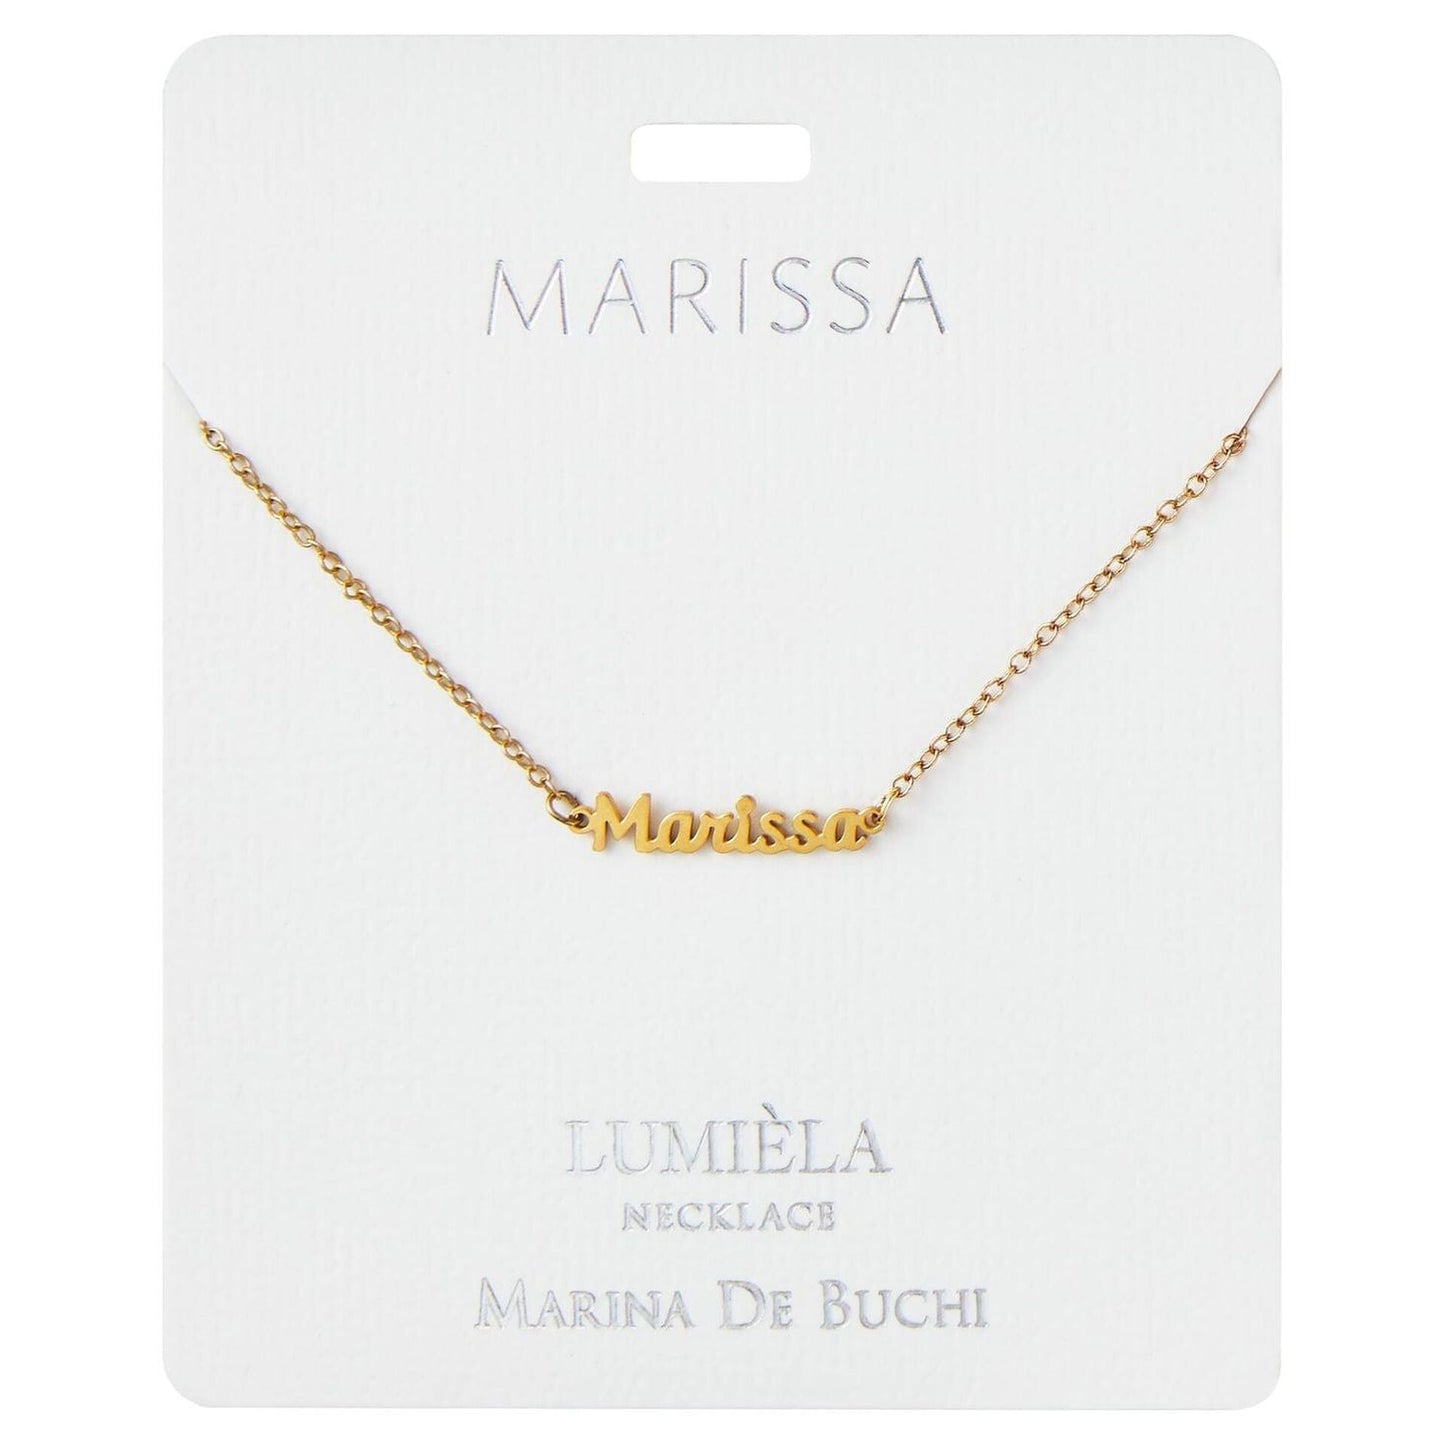 Lumiela Personalized Nameplate Megan Necklace in Gold Tone